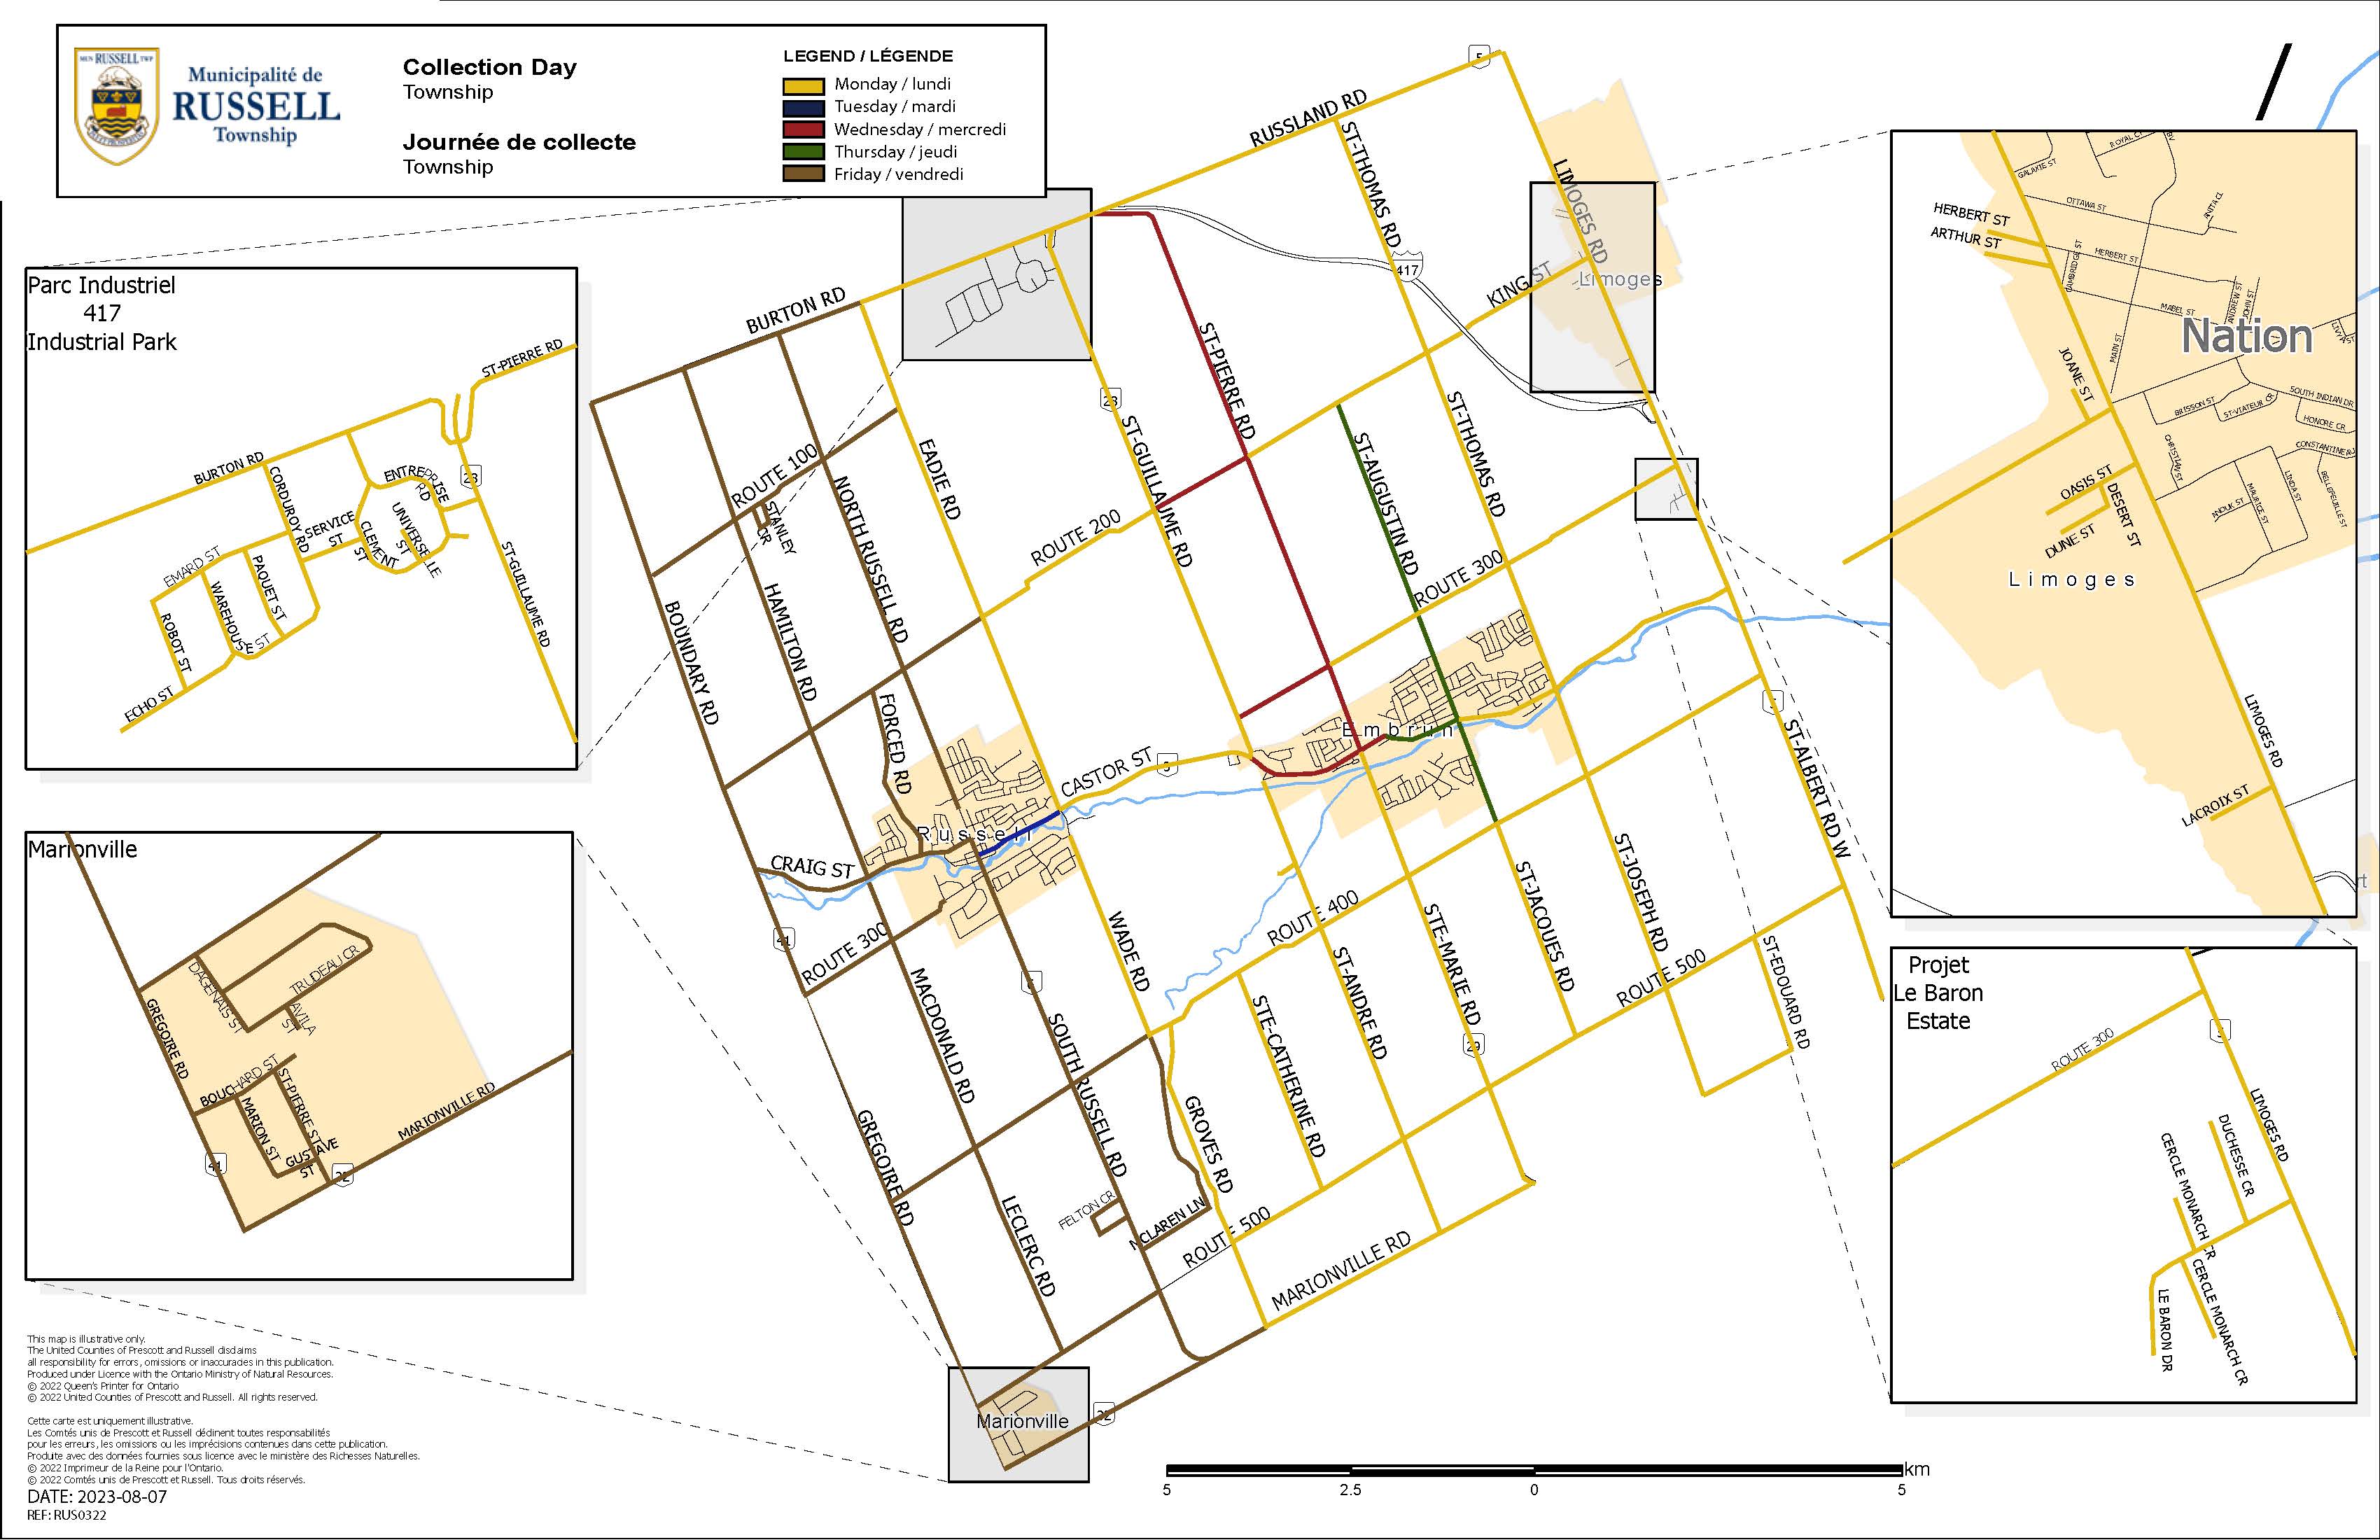 Waste Collection Map for the Township